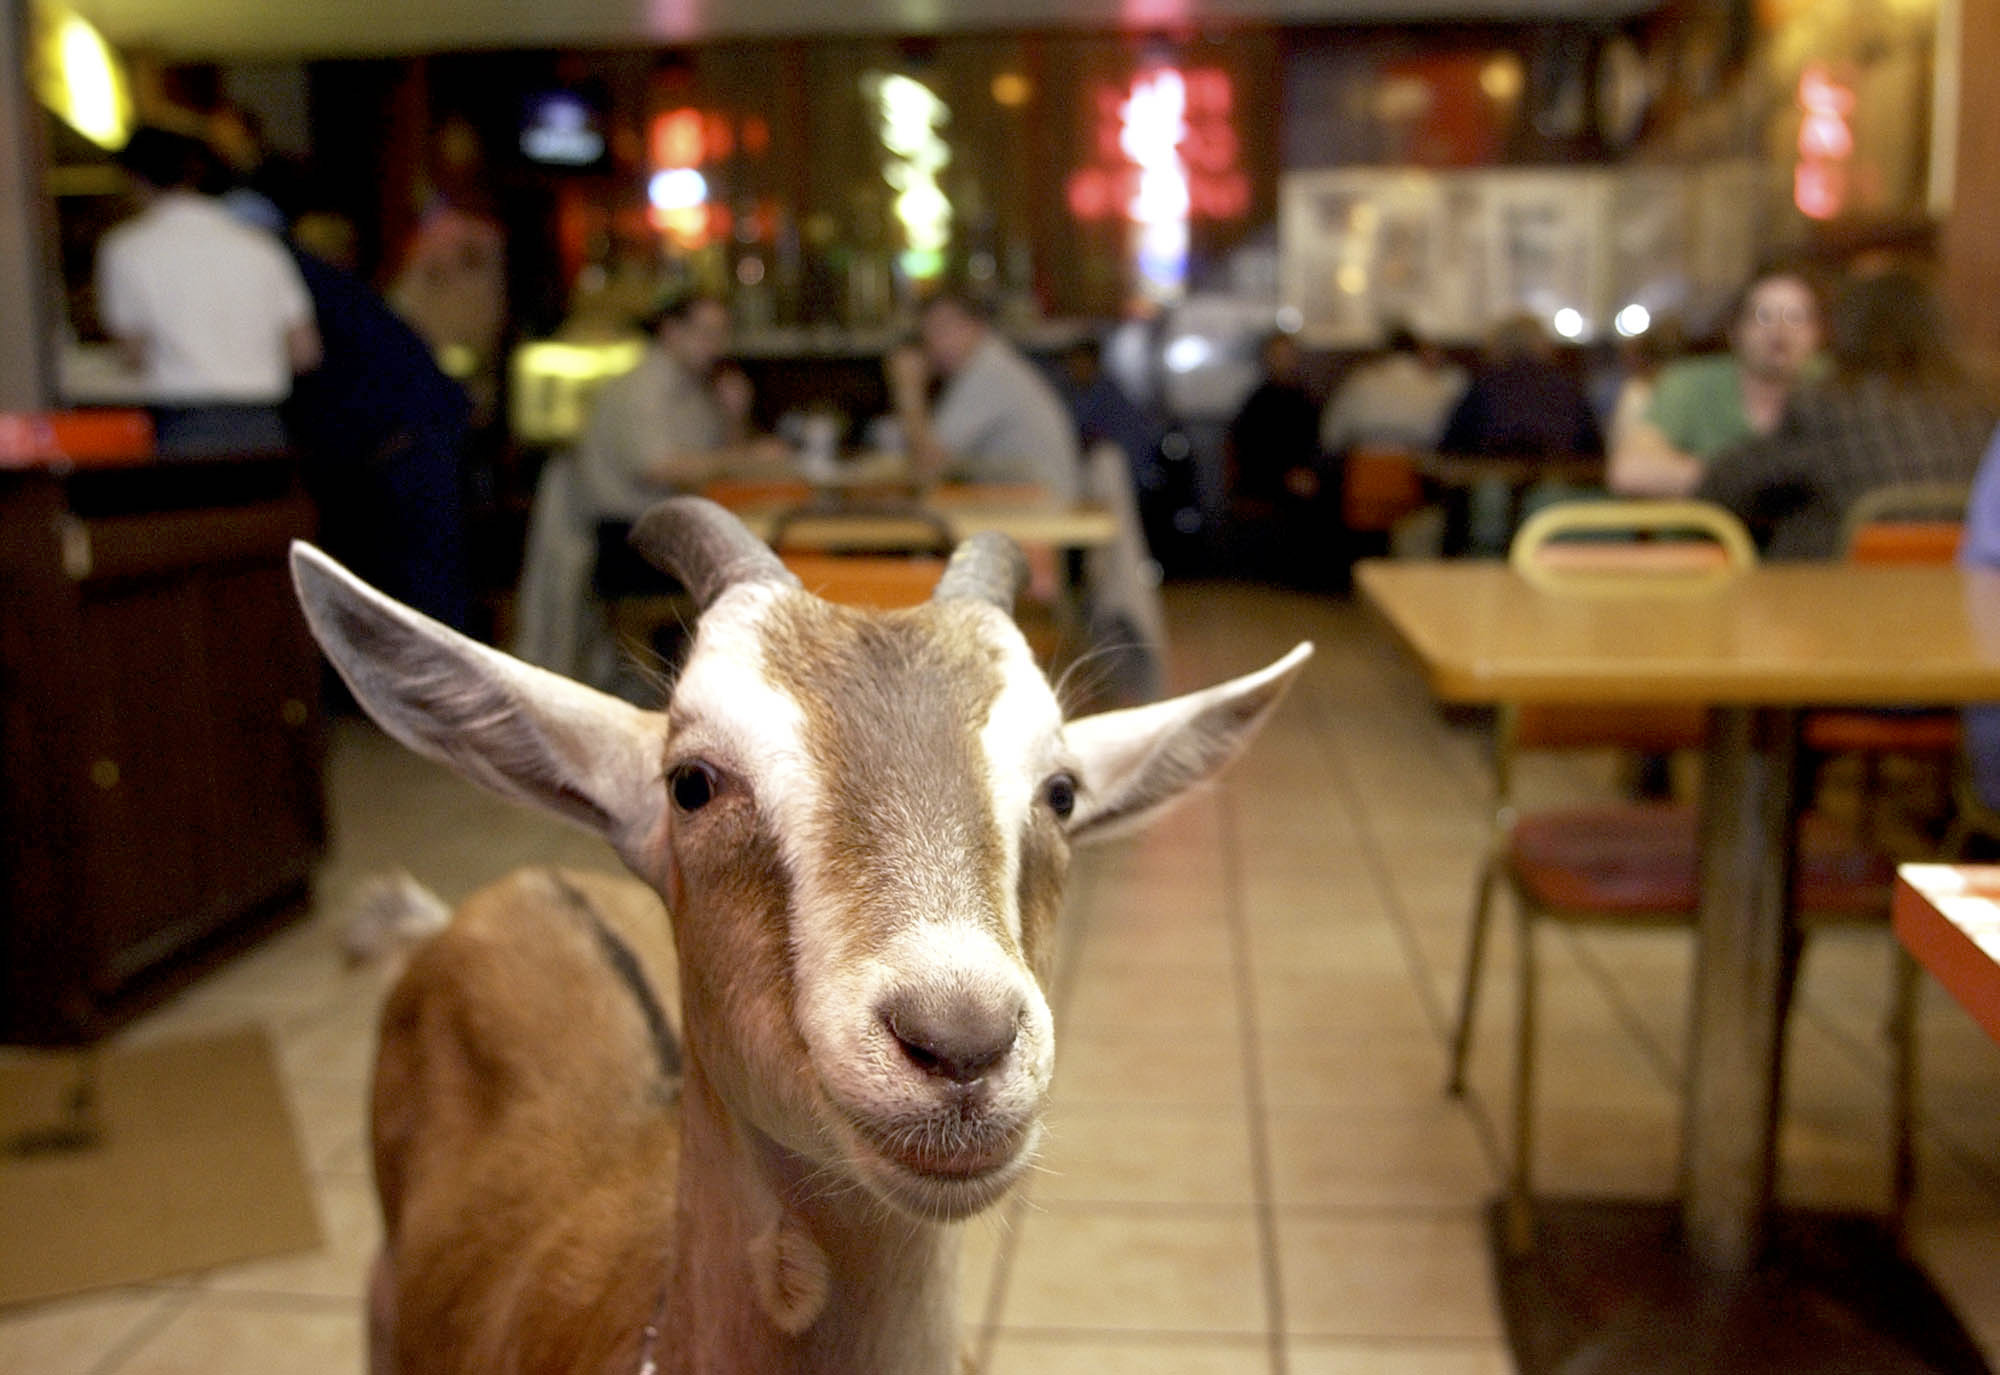 Billy Goat wanders around the Billy Goat Tavern in Chicago Thursday, Oct. 16, 2003. Many fans of the Chicago Cubs blame the curse of the Billy Goat for the team's 9-6 loss to the Florida Marlins in the final game of the NL Championship series.(AP Photo/Steve Matteo) ORG XMIT: CXSM102